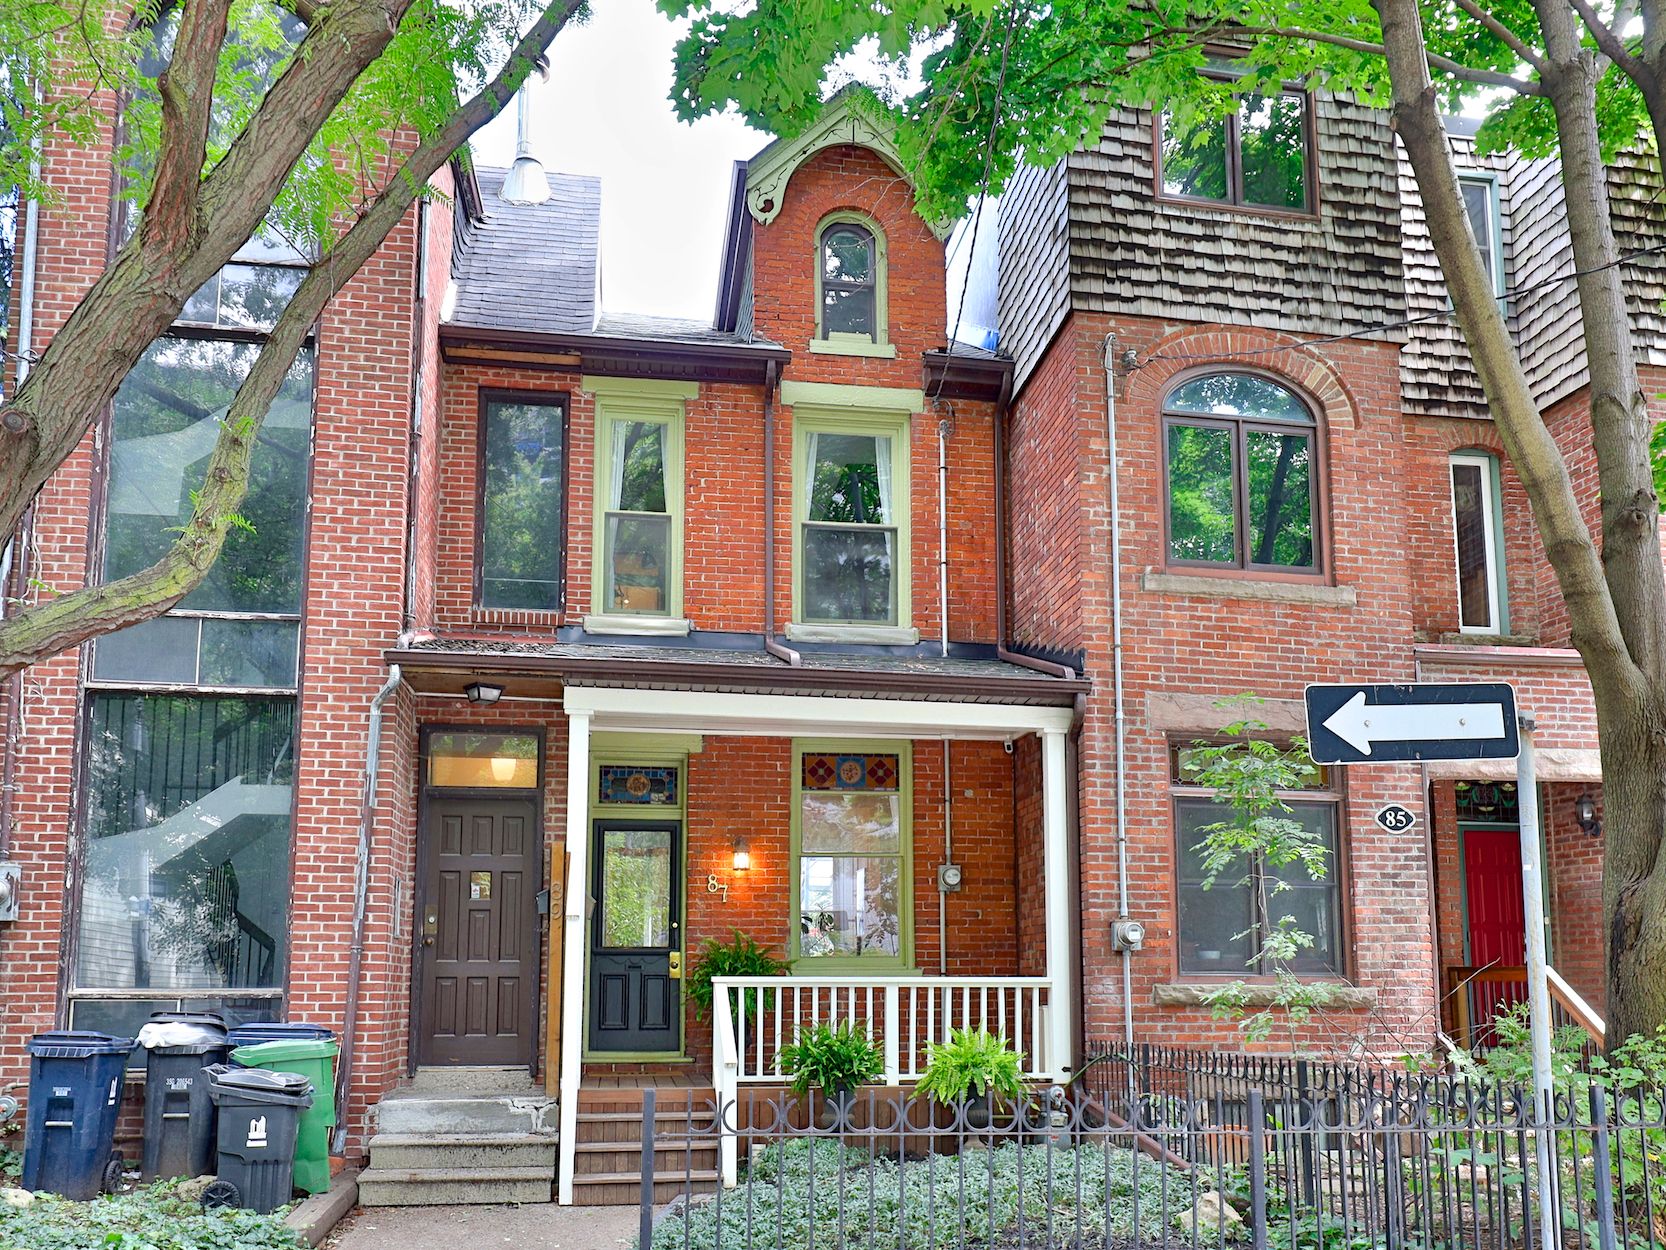 Main Photo: 87 Seaton St in Toronto: Cabbagetown Freehold for sale (Toronto C08)  : MLS®# C4885730